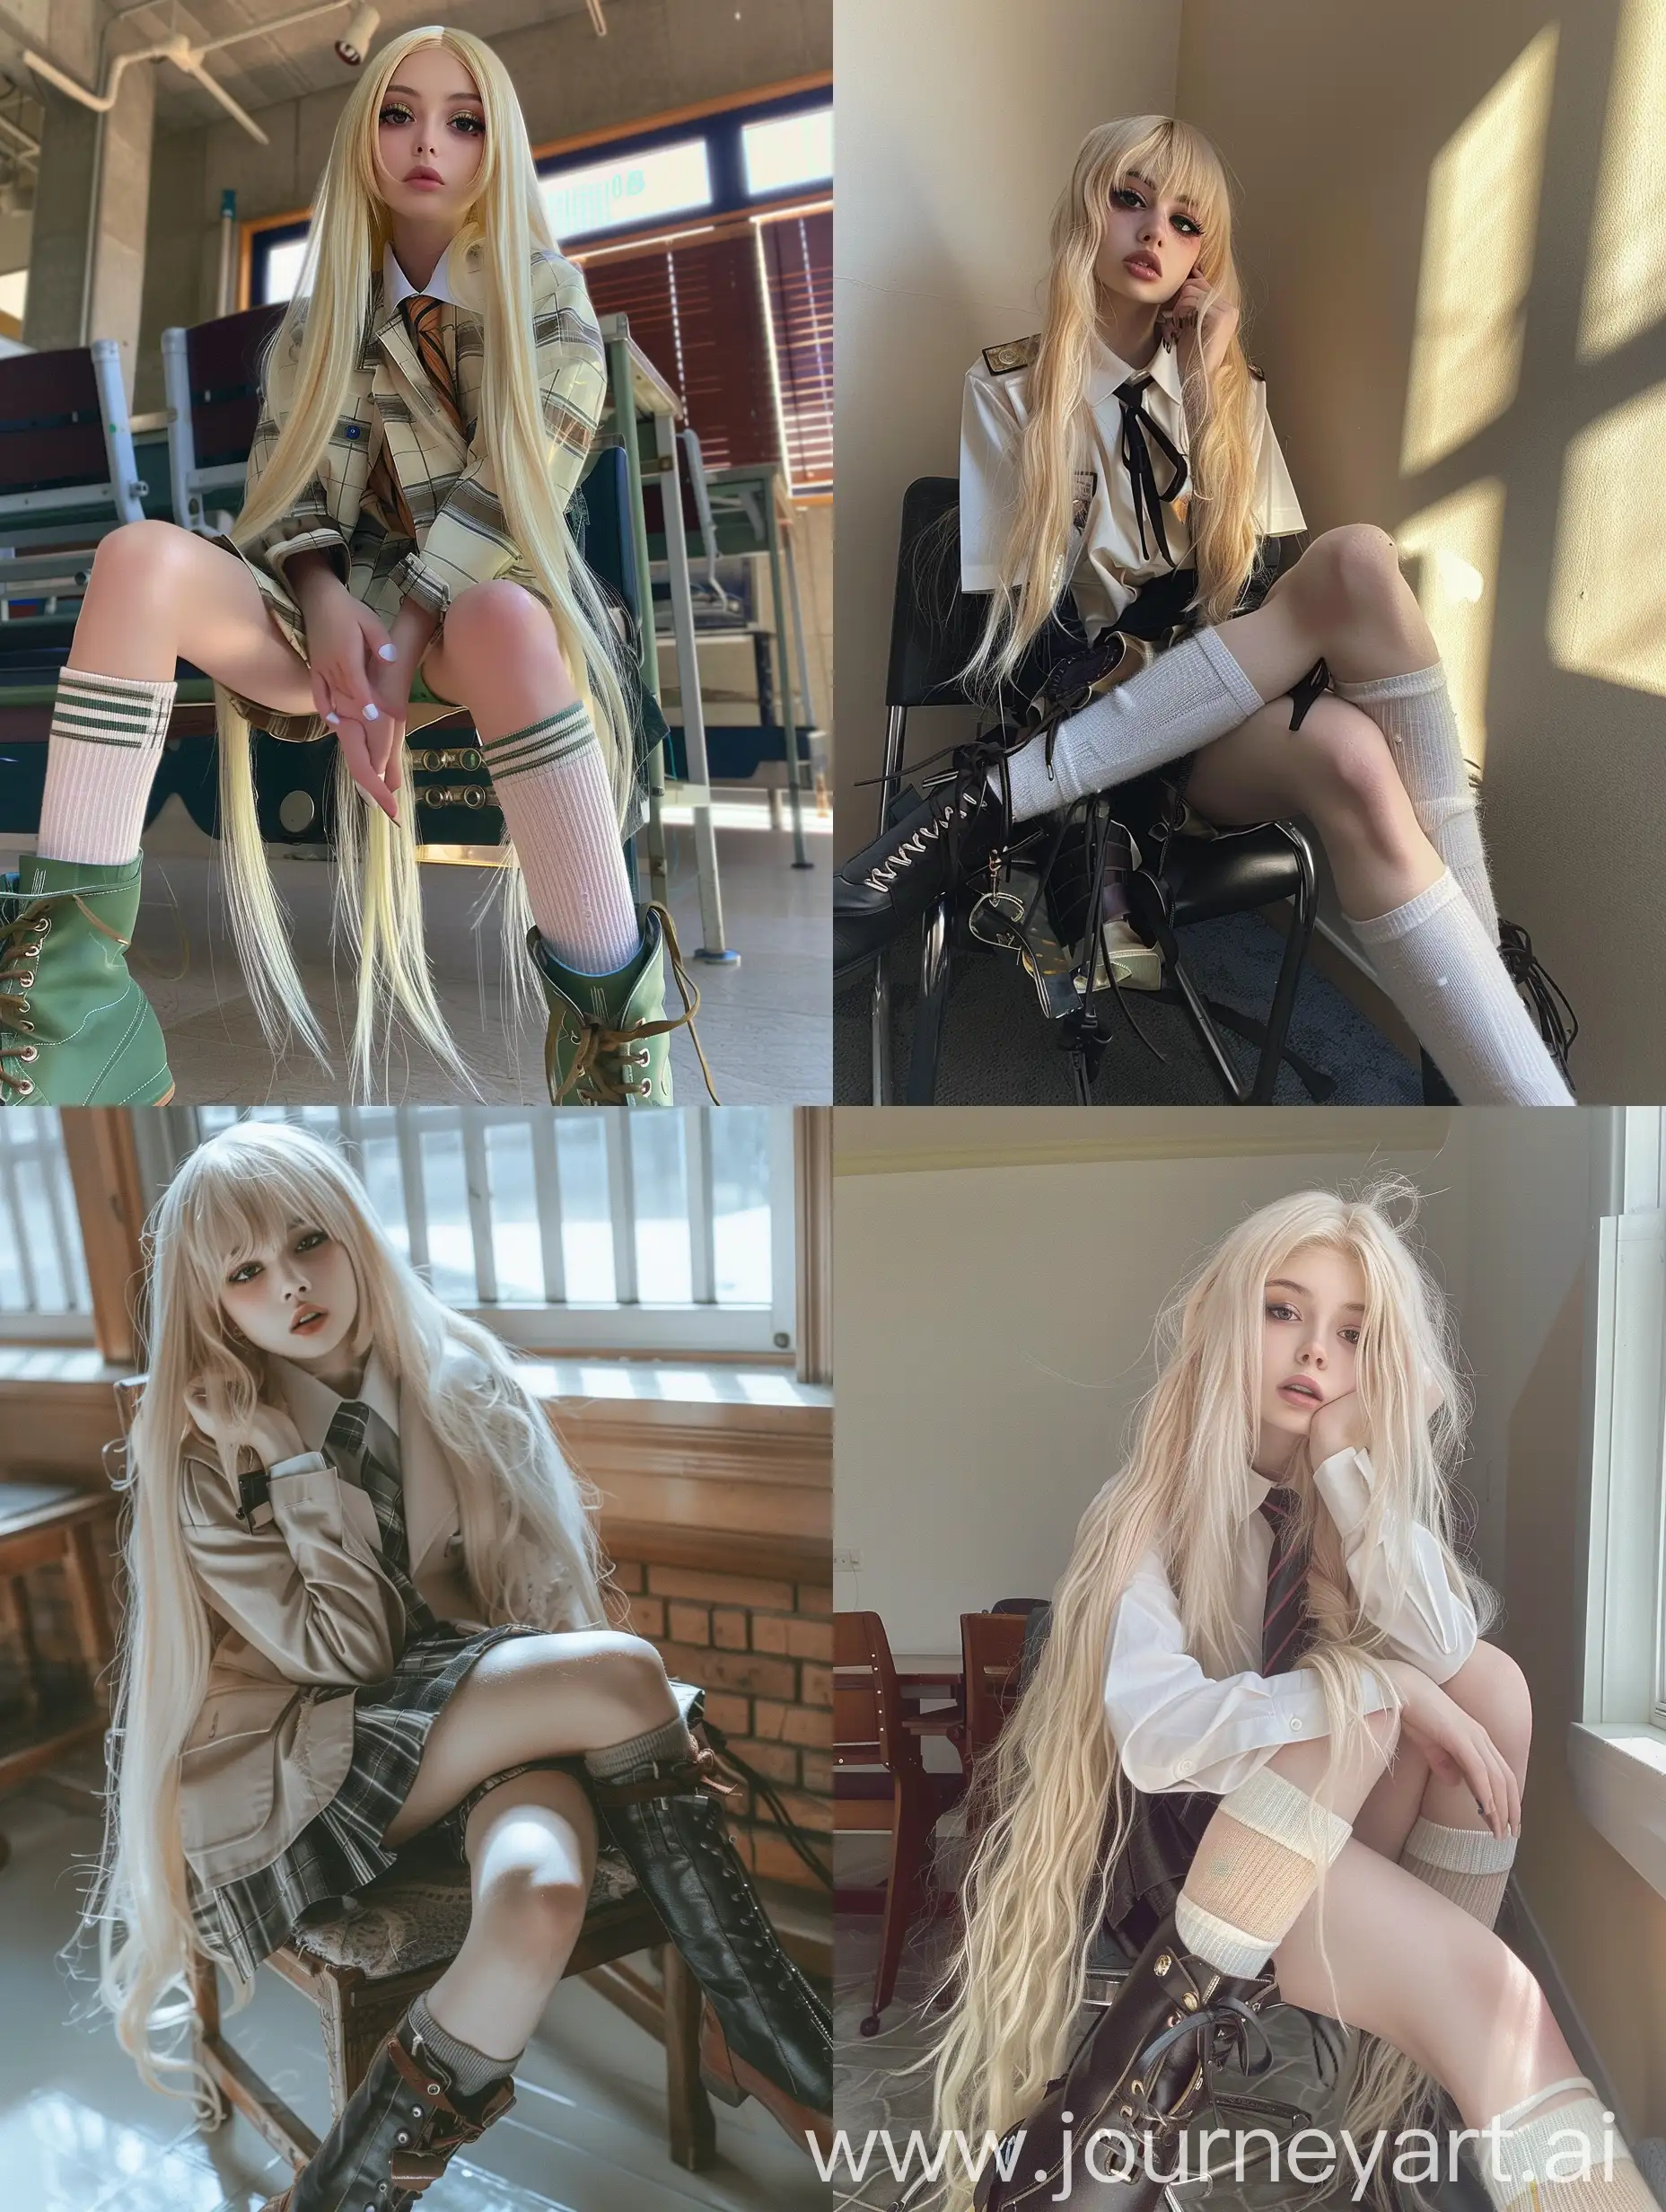 1 girl, long blond hair ,18 years old ,influencer , beauty, in the school , school uniform , makeup , sitting on chair , socks and boots , no effect , selfie , iphone selfie , no filters , iphone photo , natu